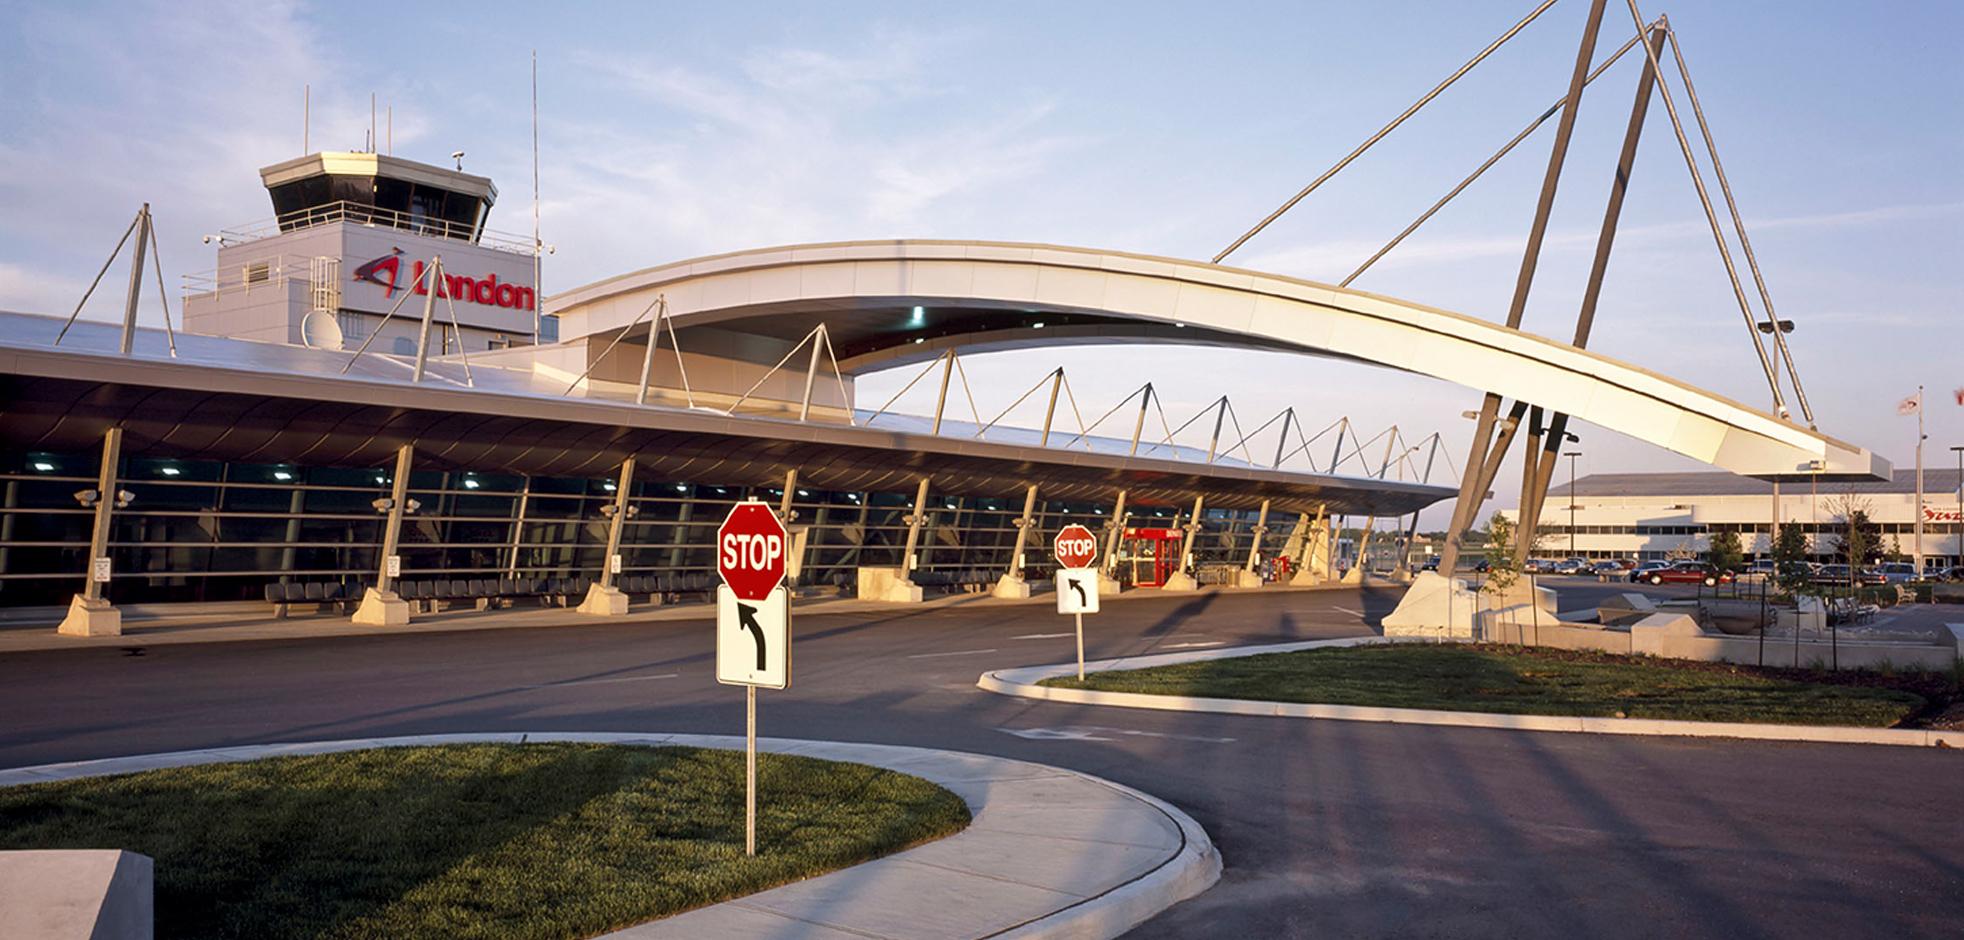 Exterior view of the main public entrance at The London International Airport in London, Ontario